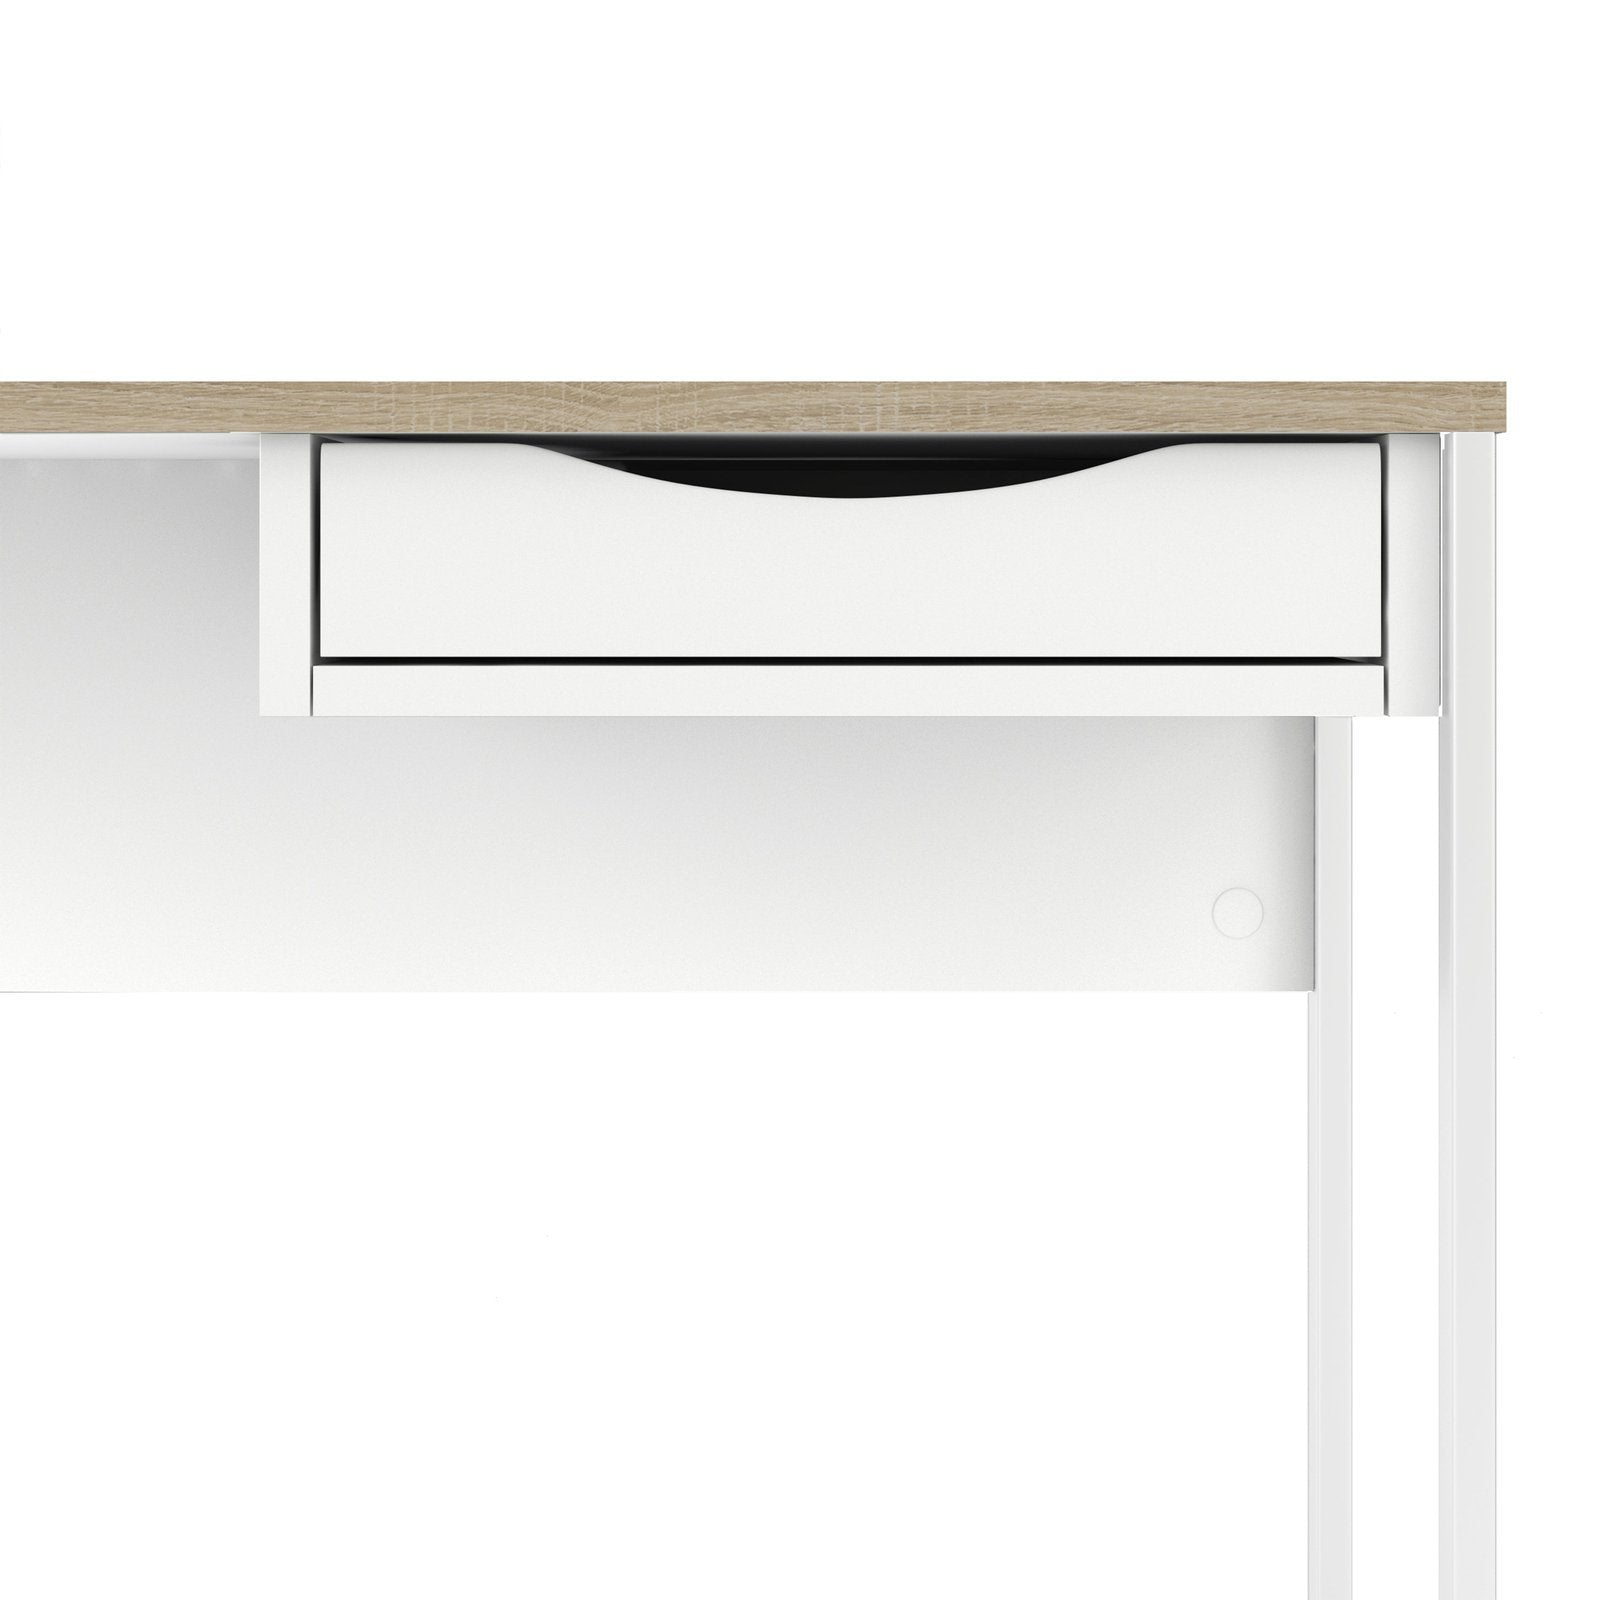 Function Plus Desk with 1 Drawer